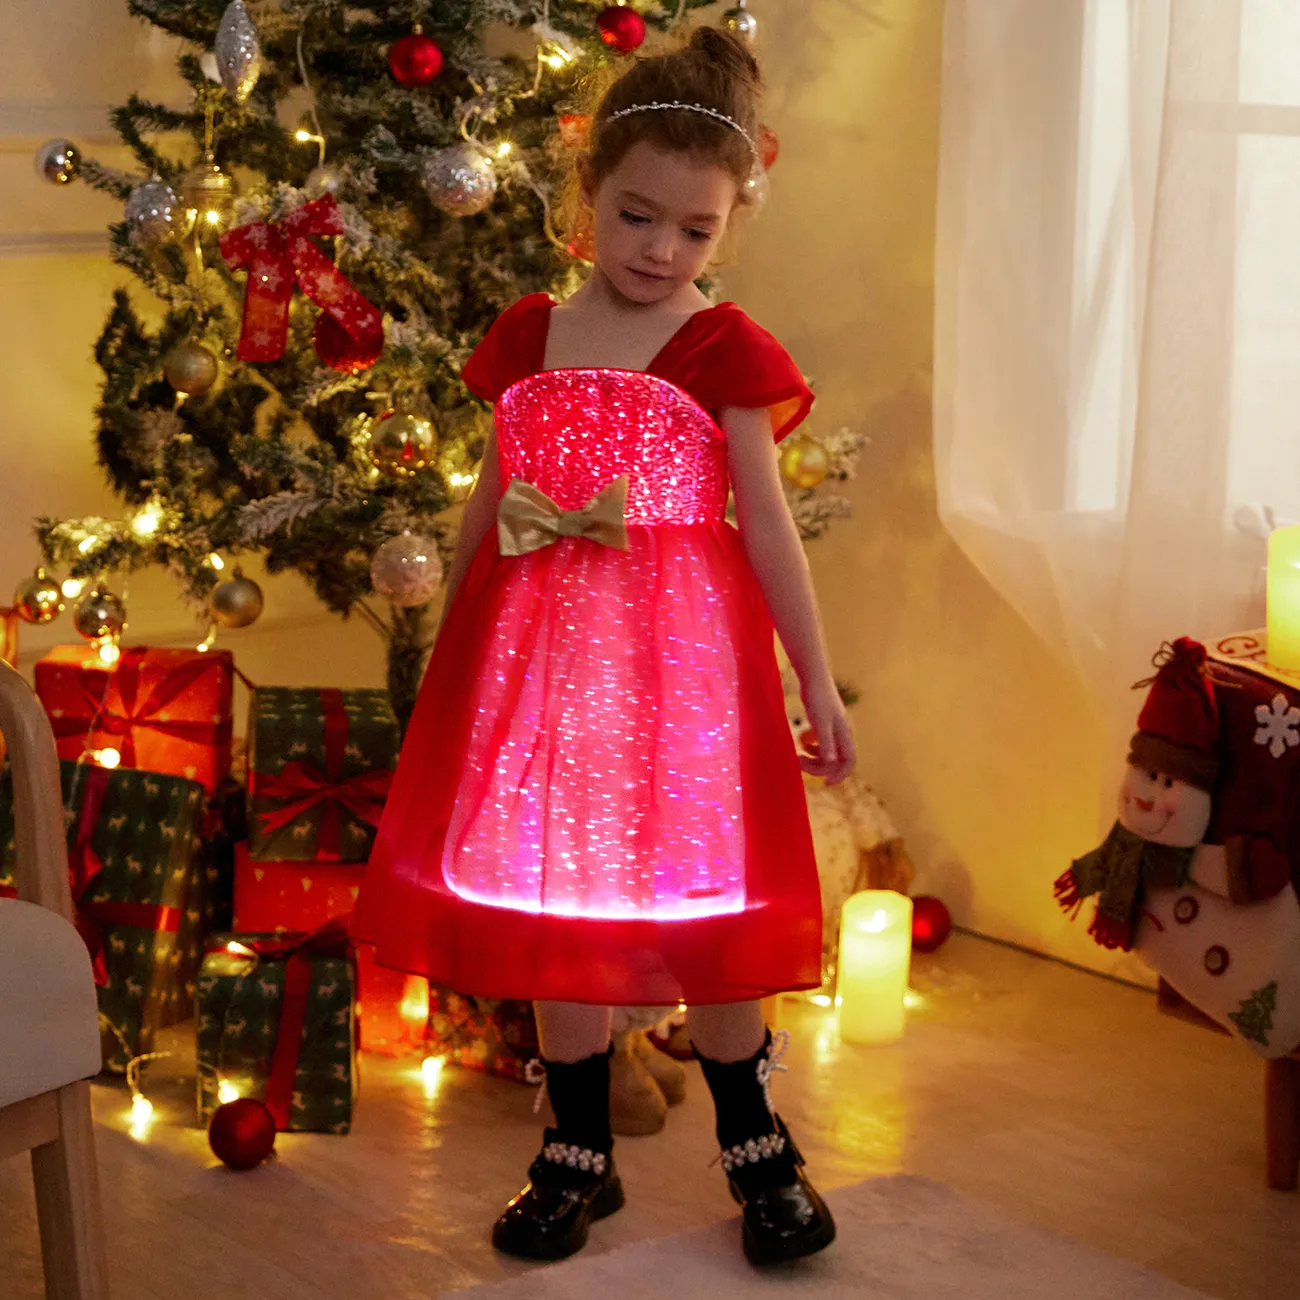 Go-Glow Christmas Illuminating Dress with Light Up Skirt Including Controller (Built-In Battery) Red big image 1